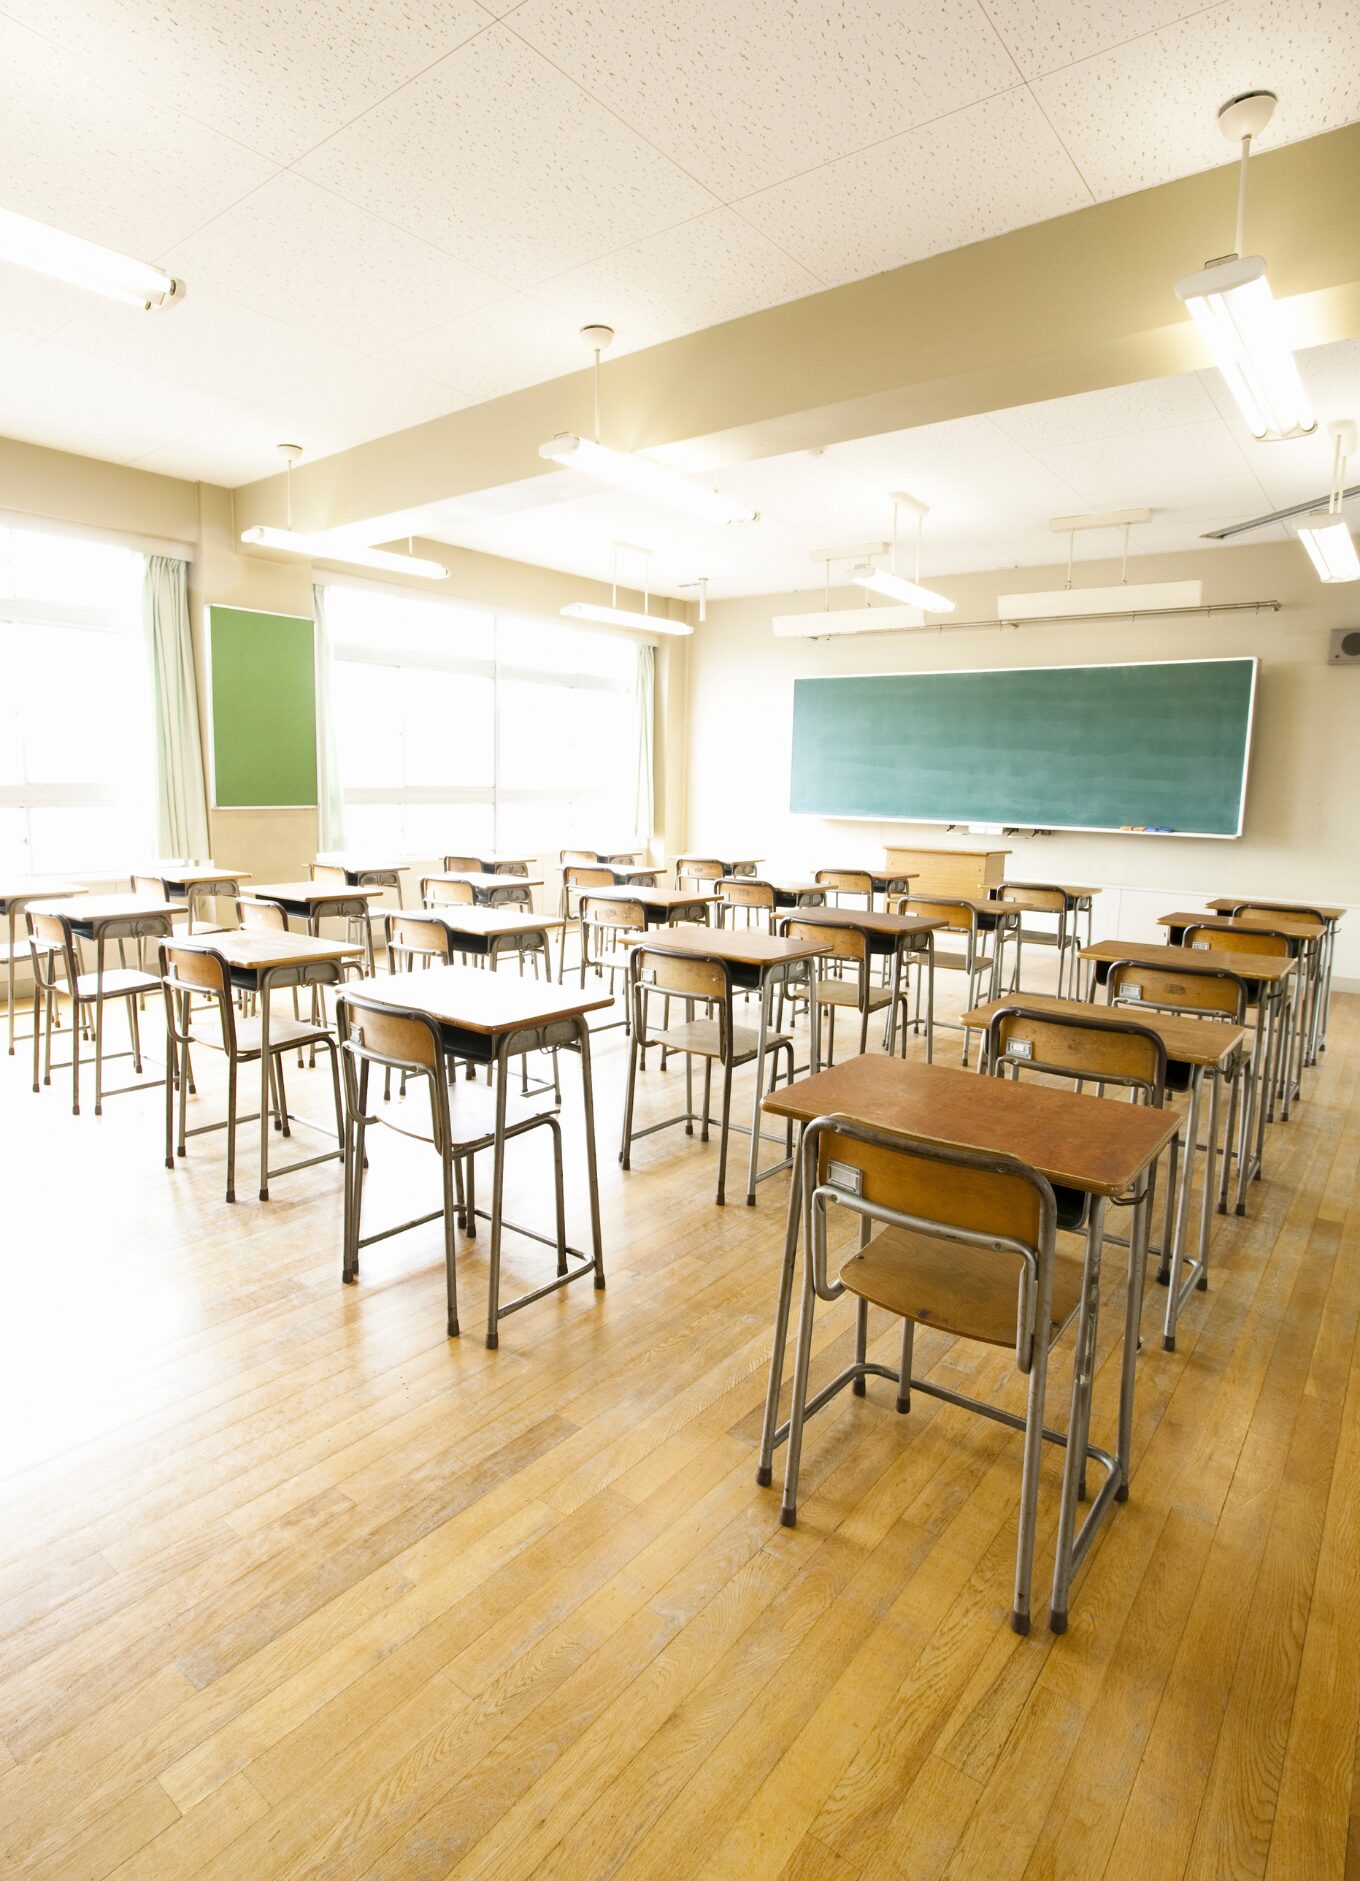 Photo shows an empty classroom with a chalkboard in the background and empty desks and chairs in the foreground.